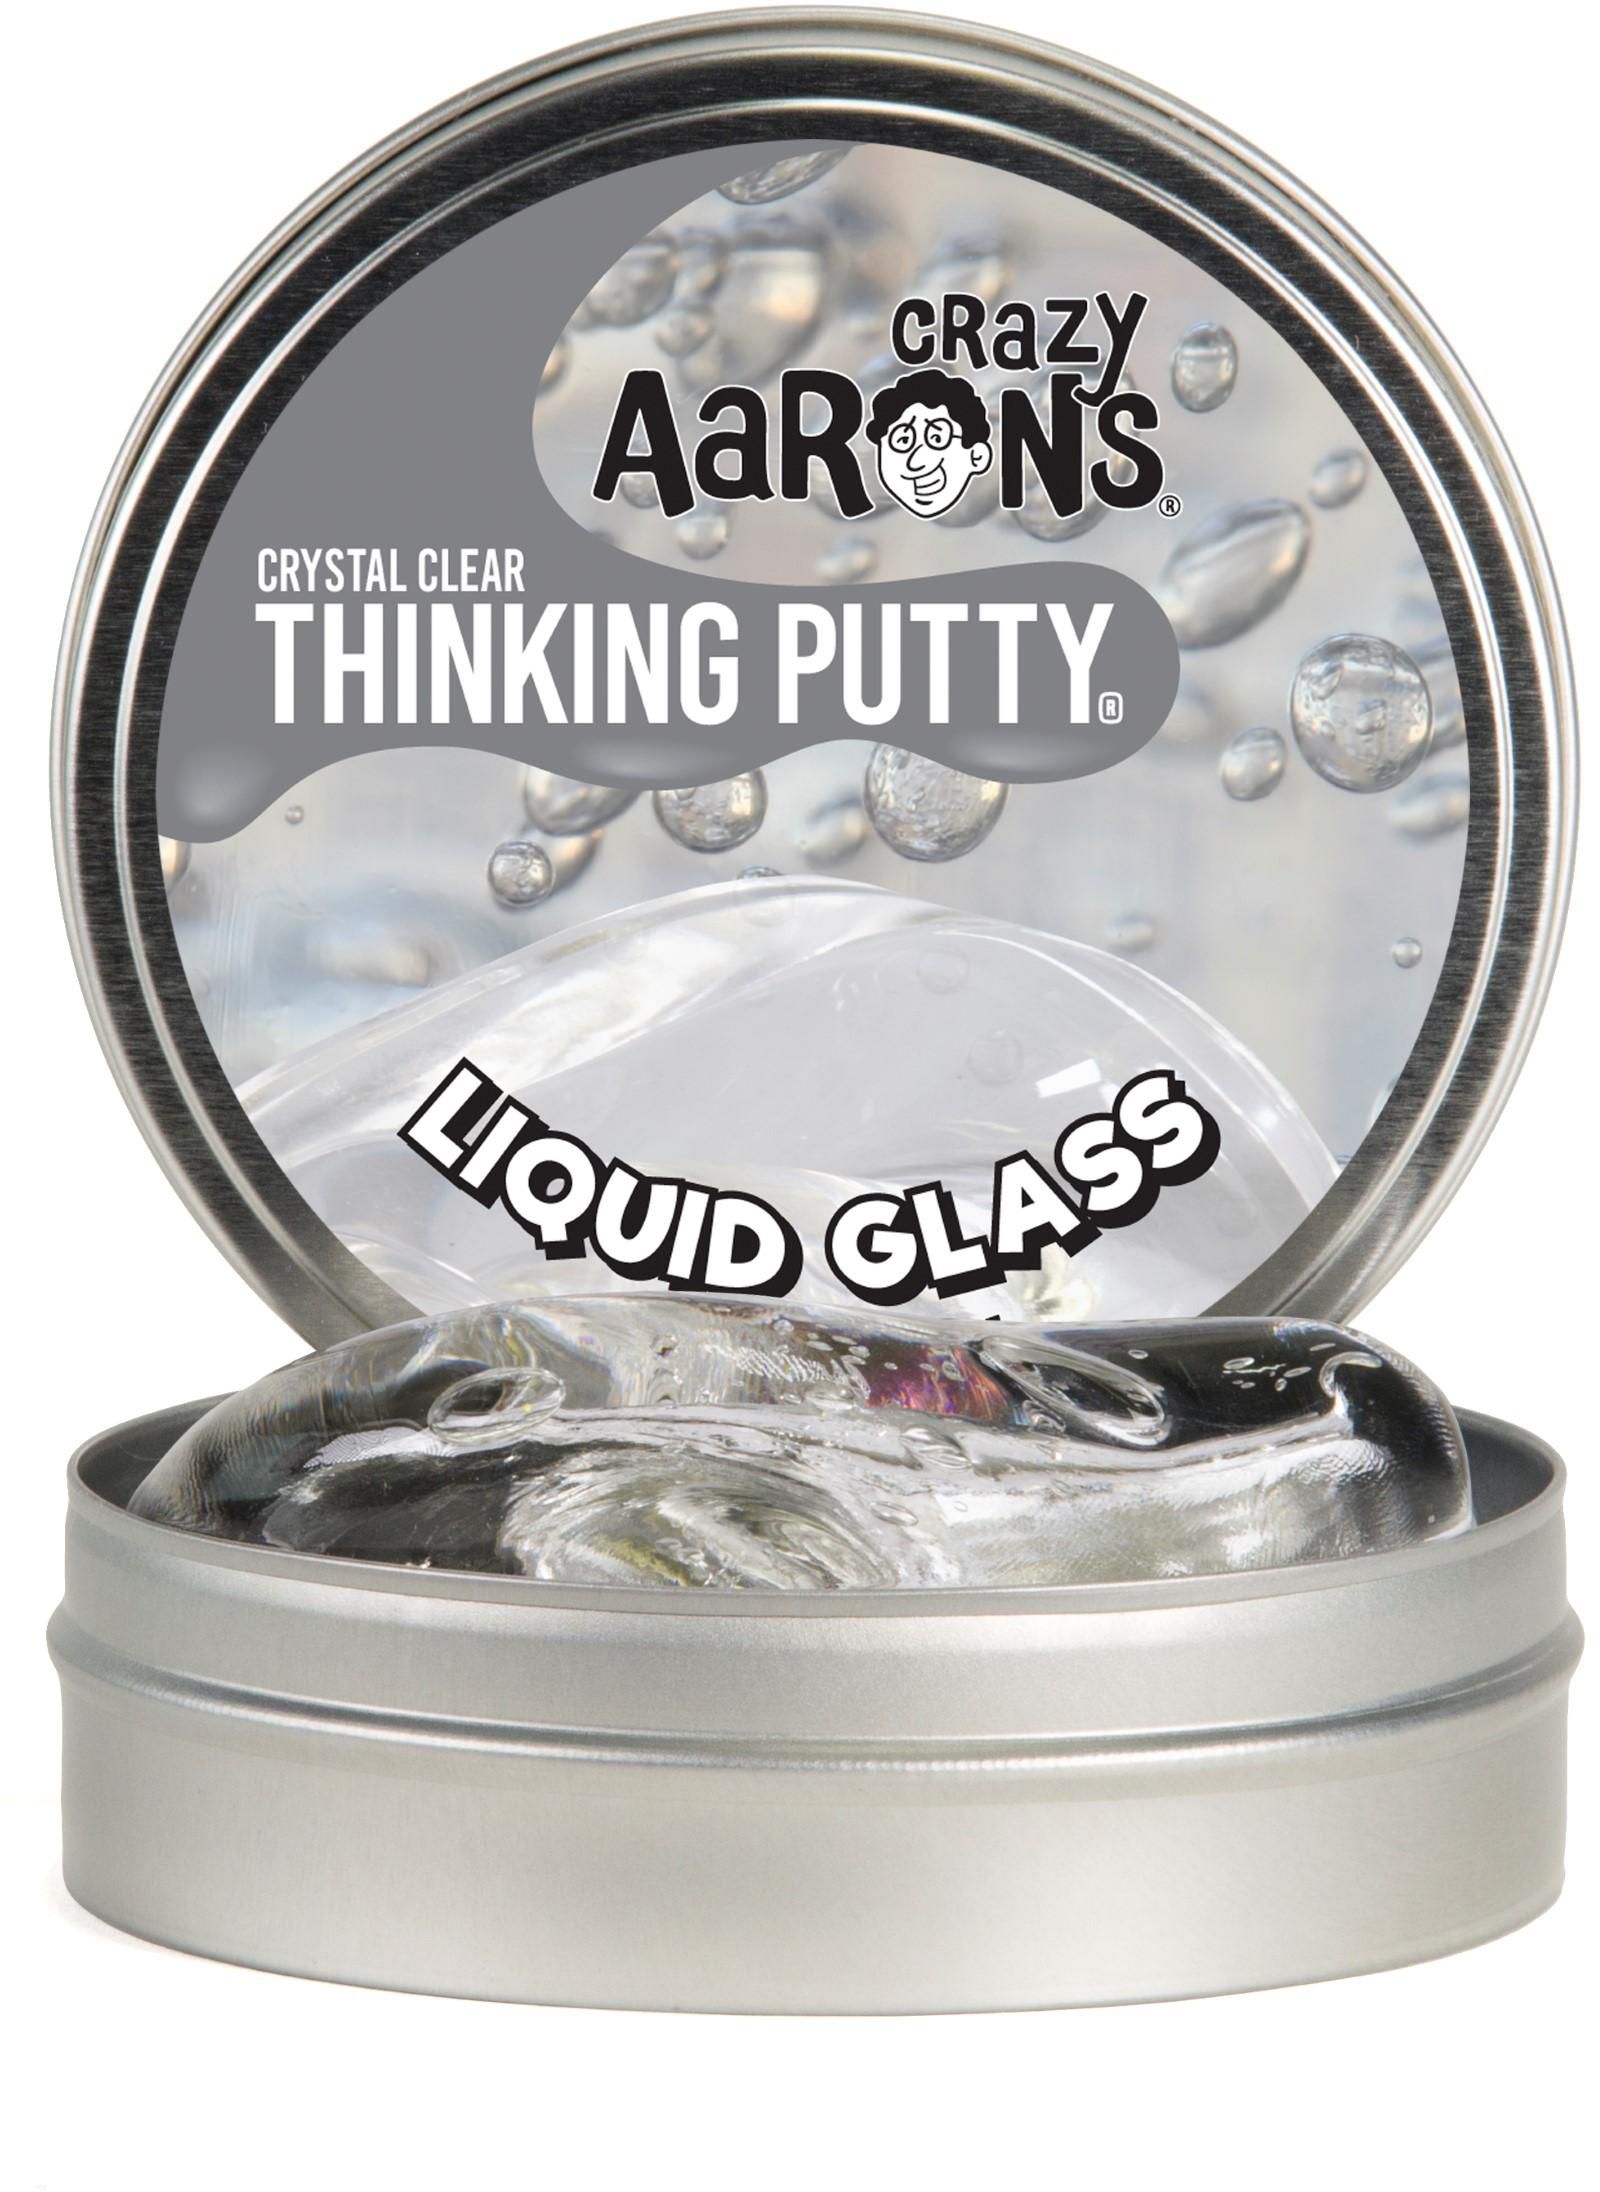 Crazy Aaron's Liquid Glass Crystal Clear Thinking Putty